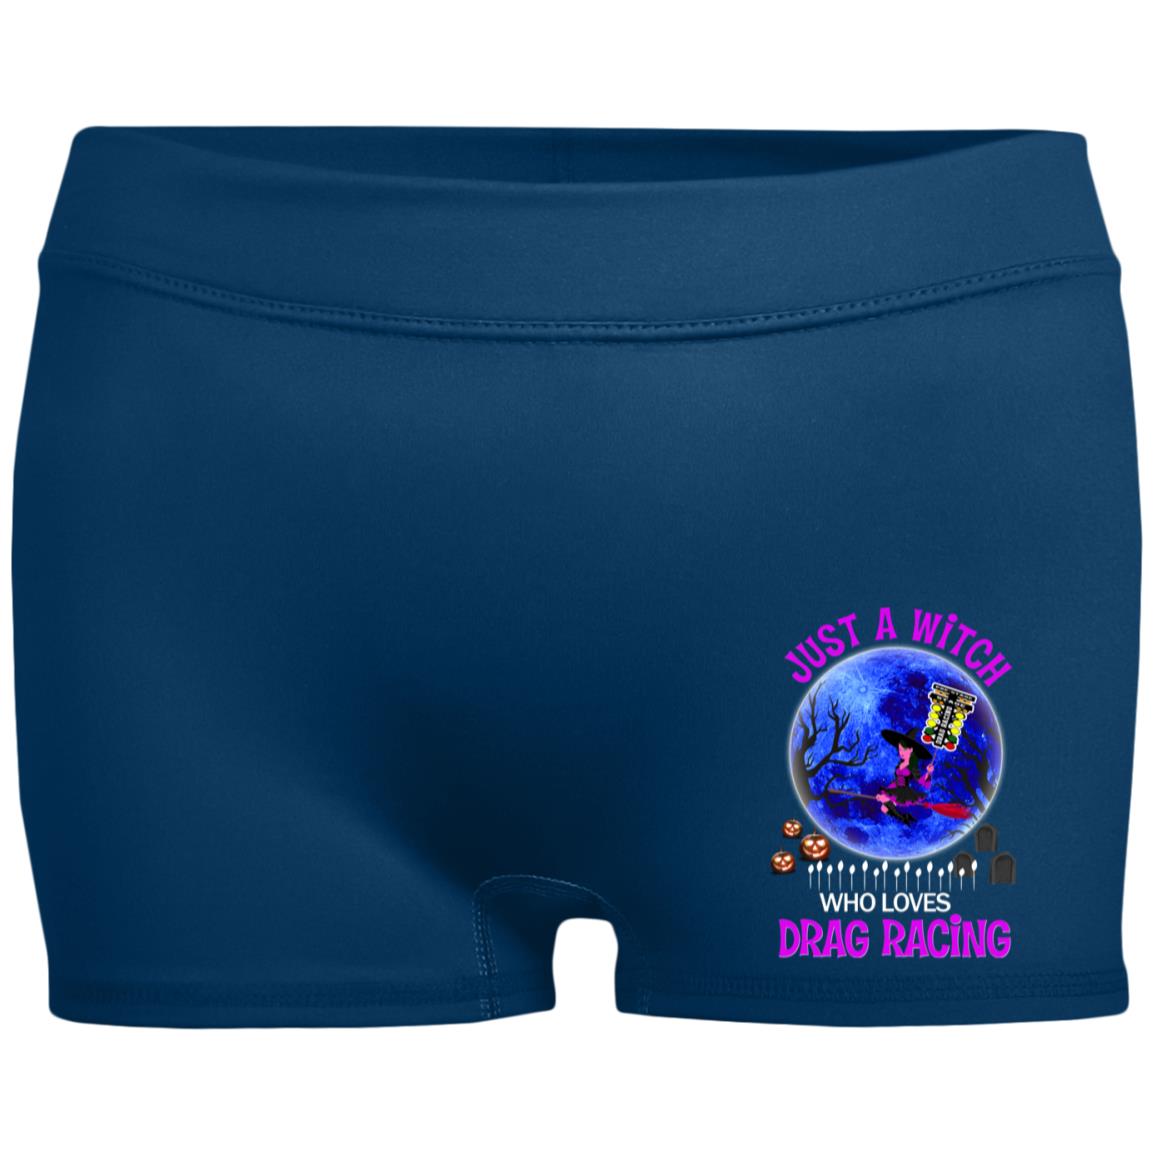 Just A Witch Who Loves Drag Racing Ladies' Fitted Moisture-Wicking 2.5 inch Inseam Shorts